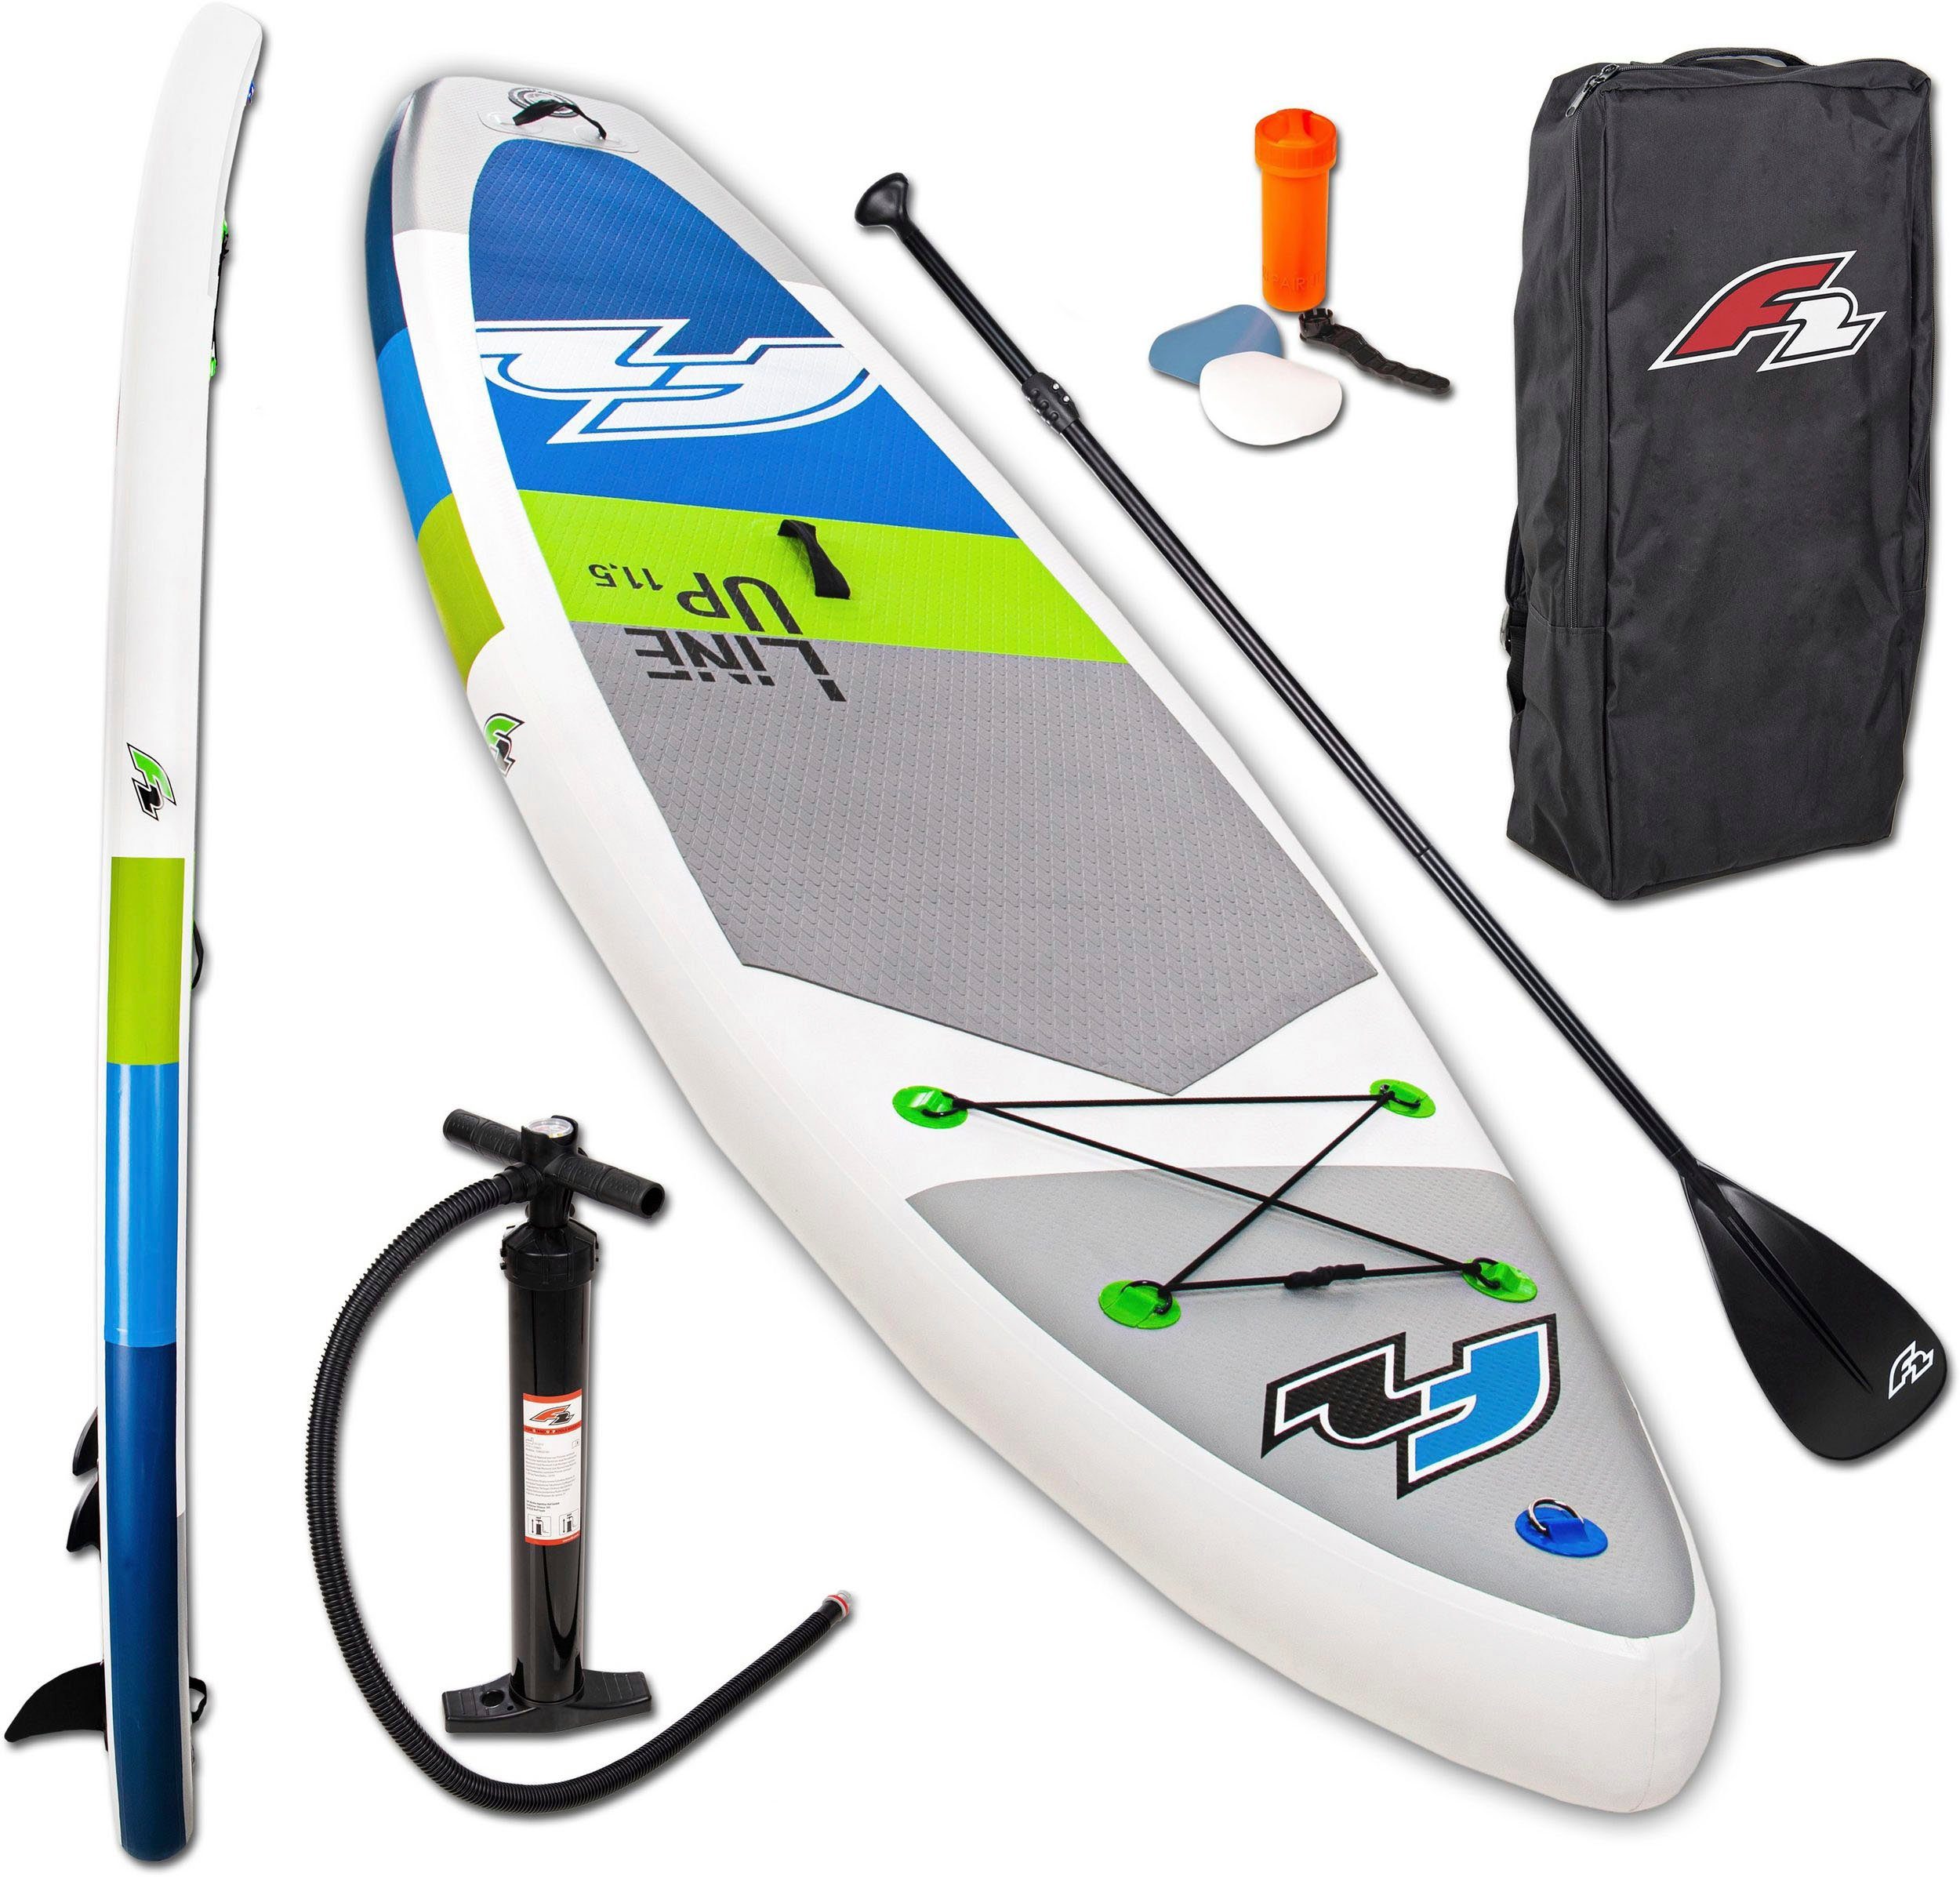 F2 Inflatable SUP-Board tlg), Up Stand SMO F2 5 (Set, Up Alupaddel, Line blue mit Paddling